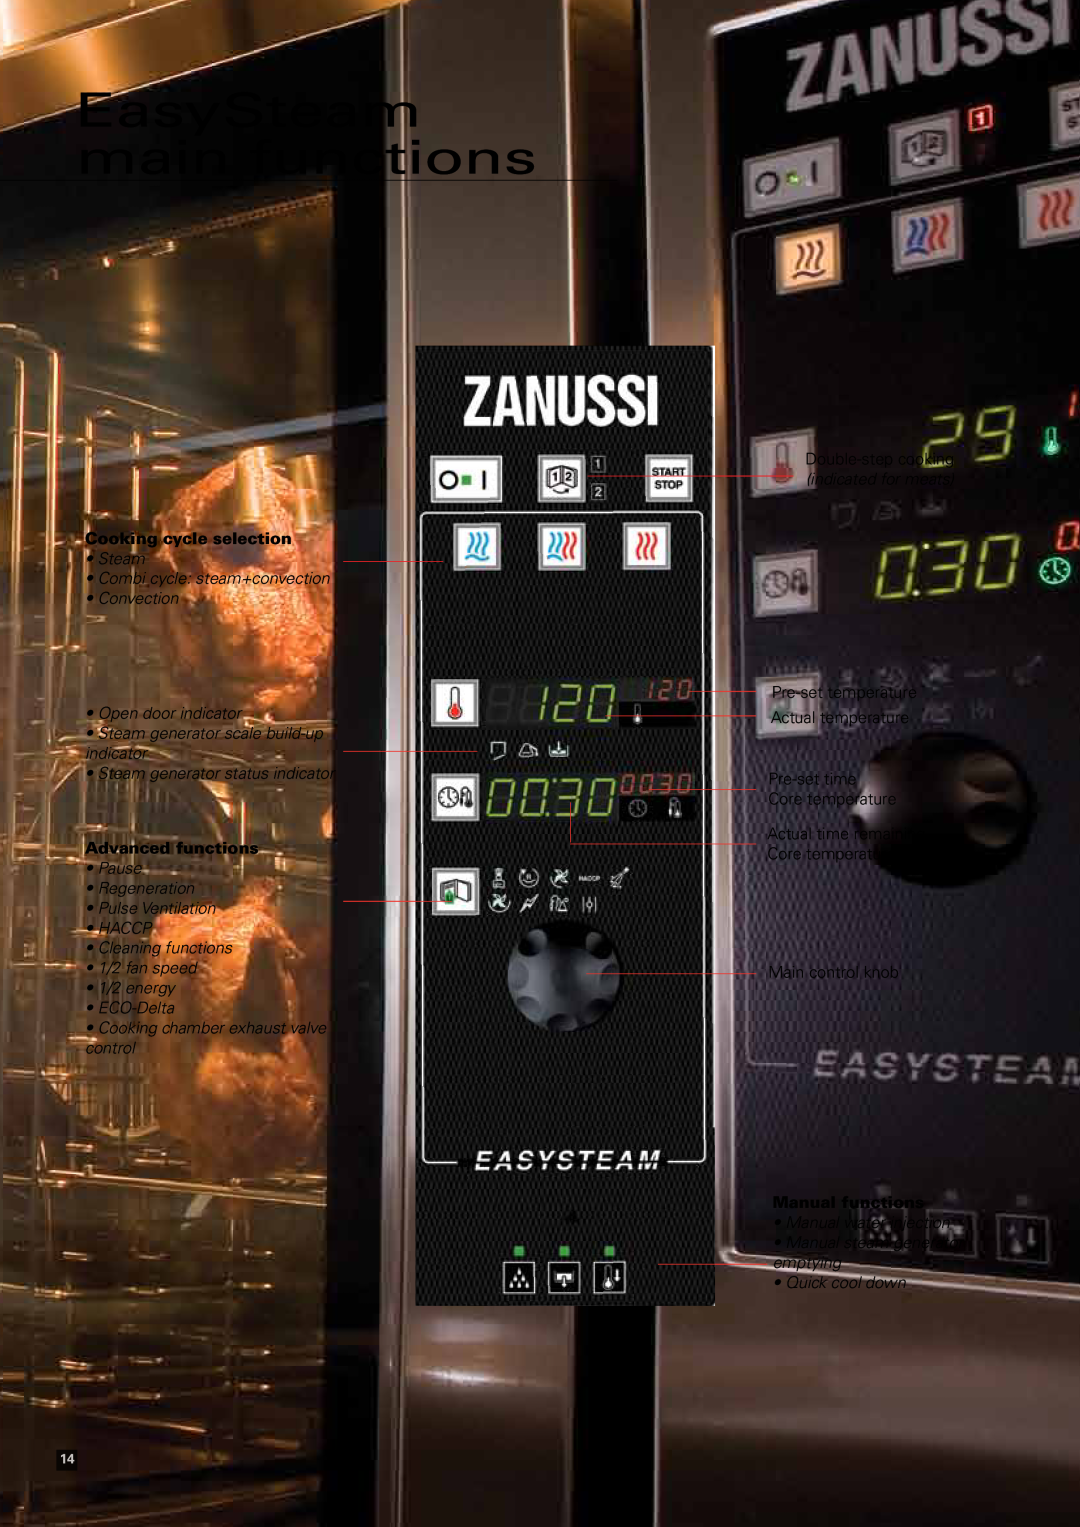 Zanussi Convection Oven manual EasySteam main functions, Cooking cycle selection, Advanced functions, Manual functions 